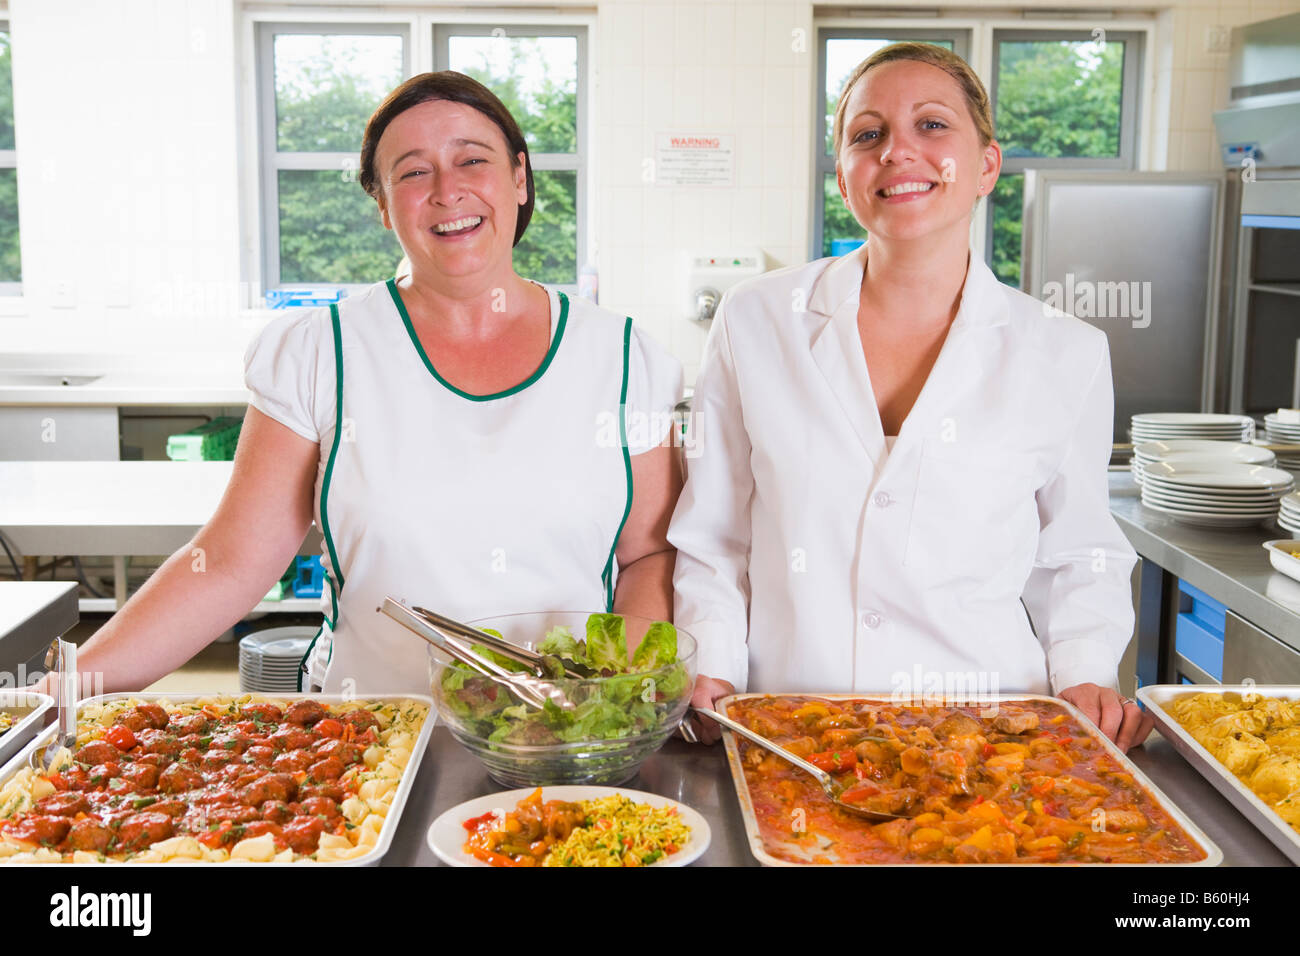 Two lunch ladies standing behind full lunch service station Stock Photo